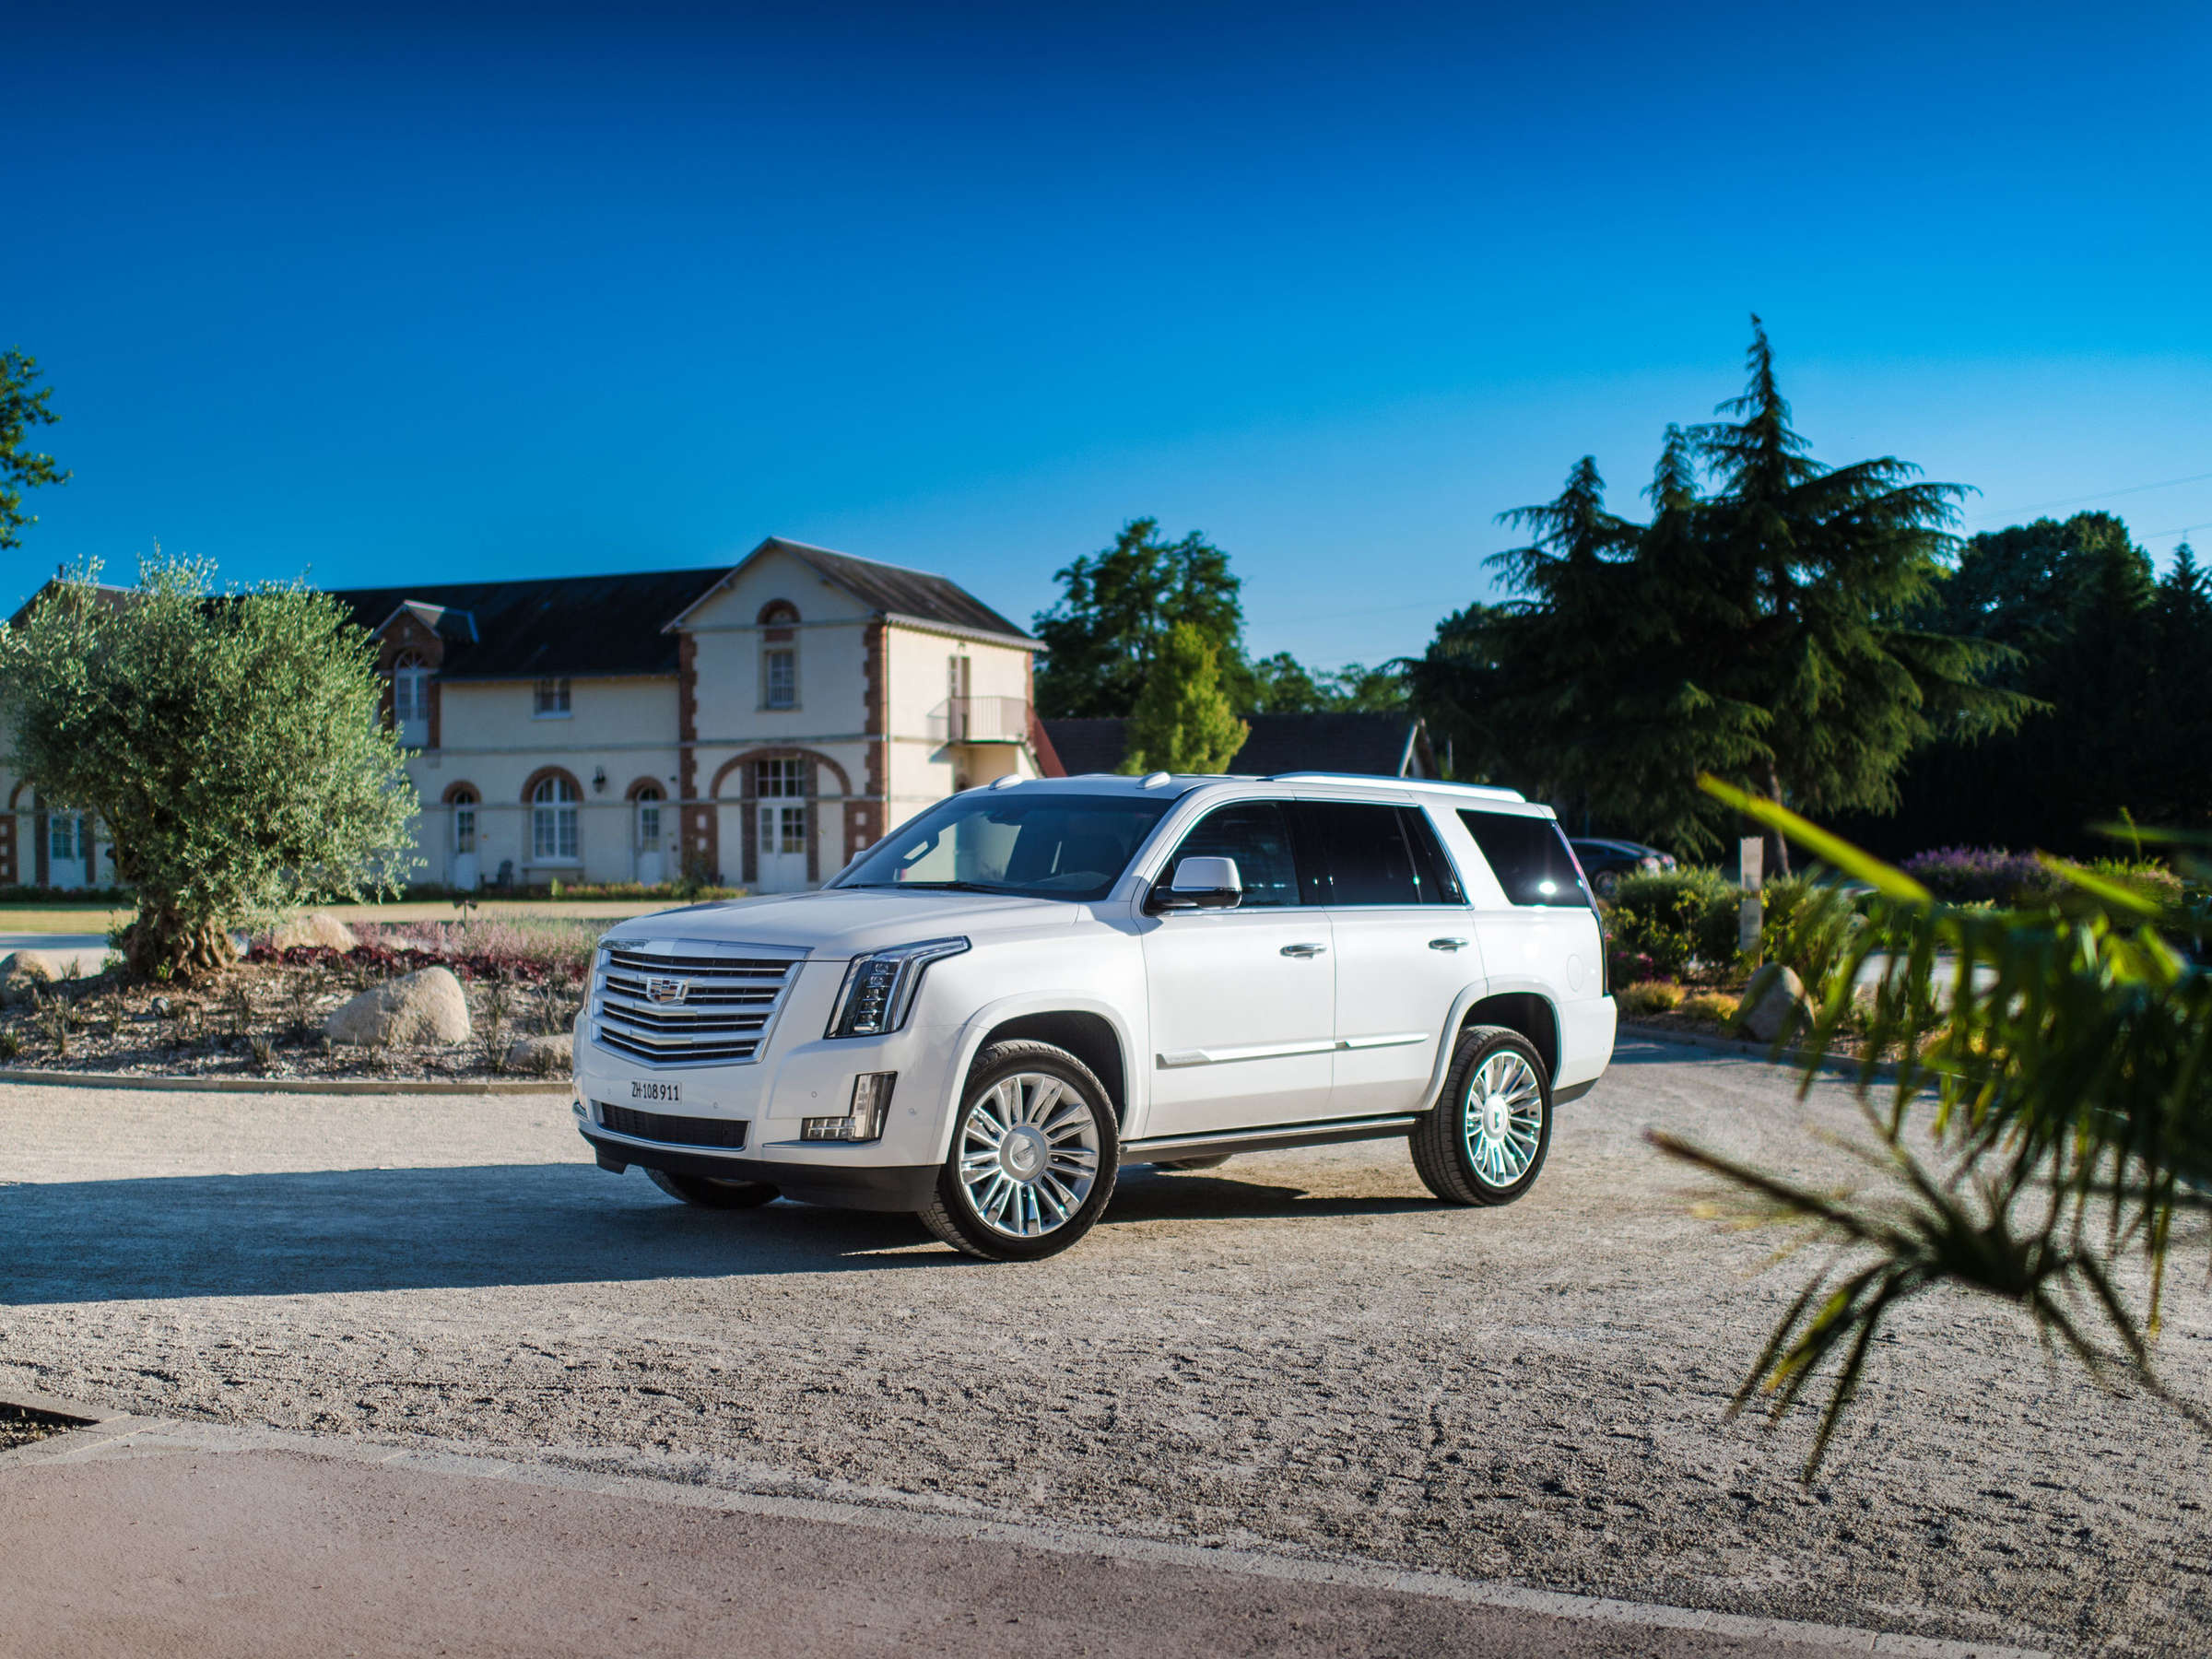 Cadillac Escalade, Presidential vehicle, Opulent luxury, Unparalleled opulence, 2400x1800 HD Desktop